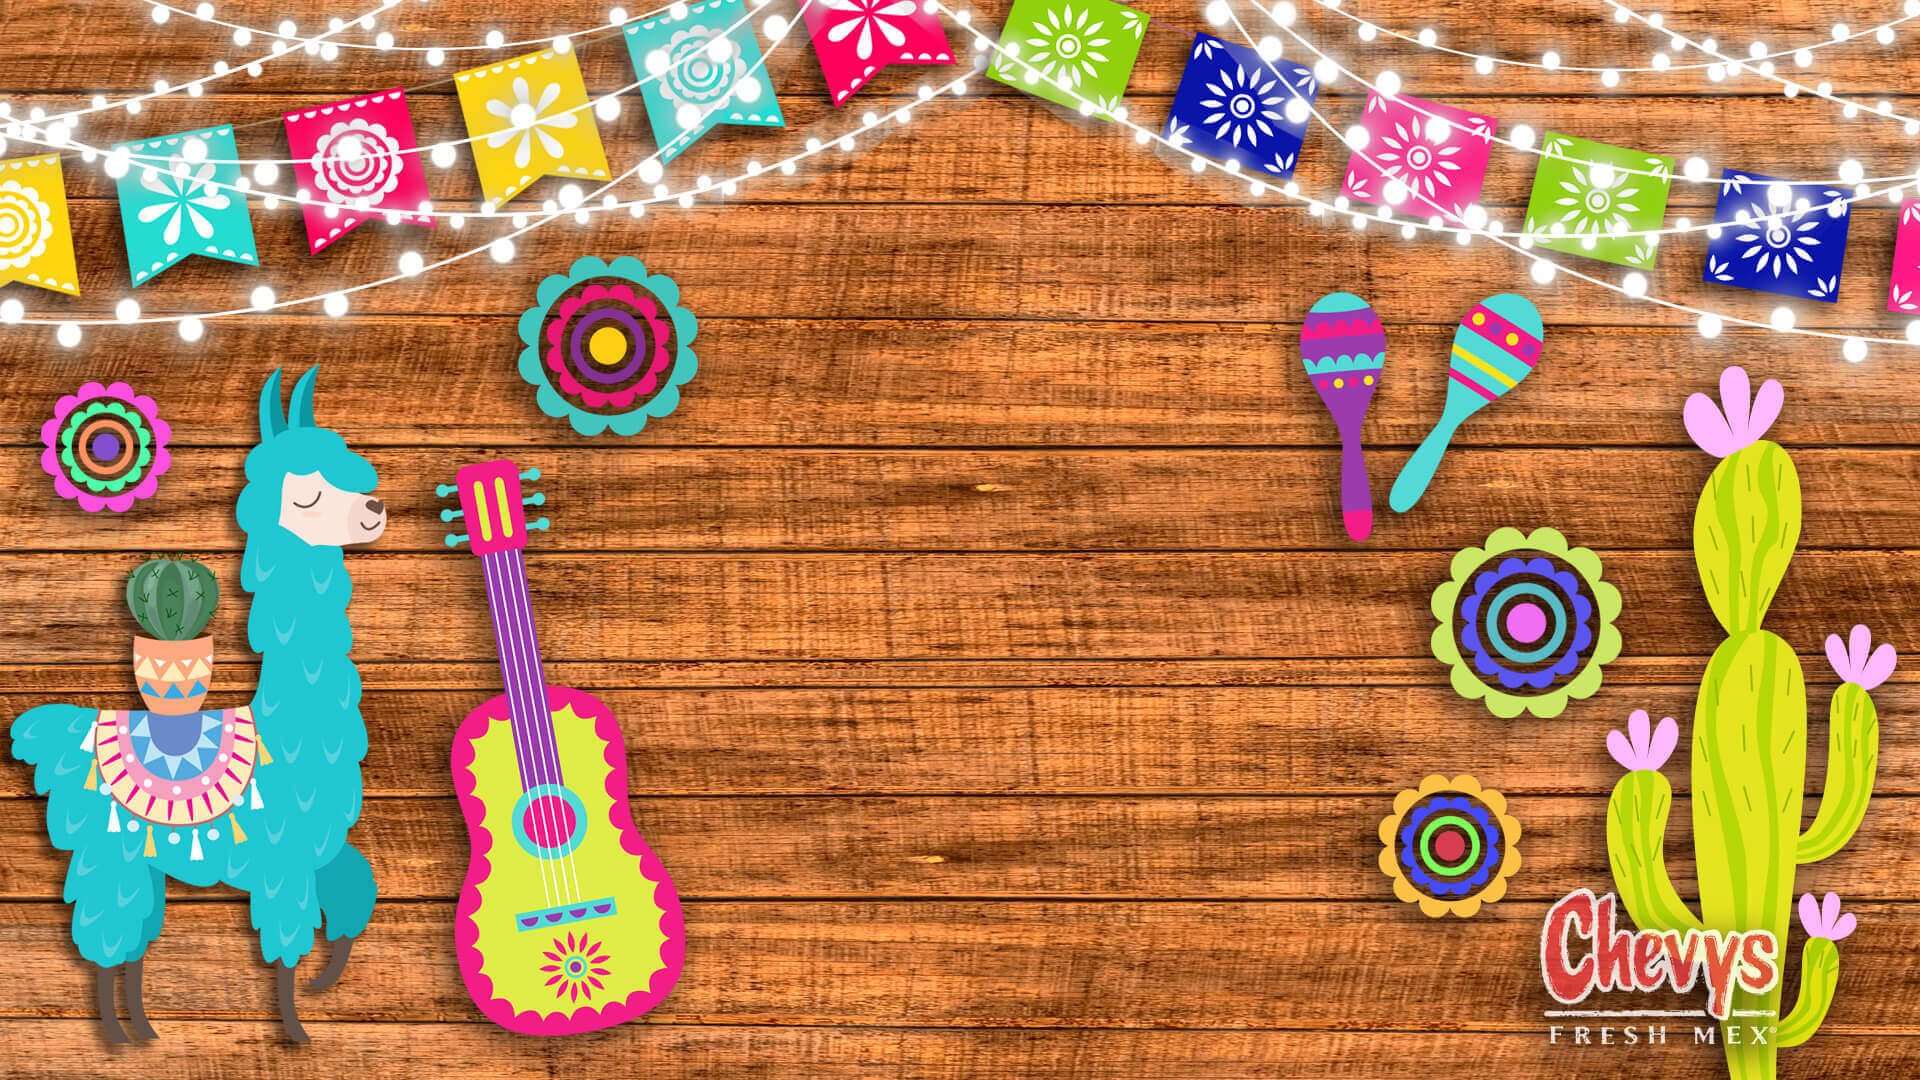 Festive Zoom Meeting Backgrounds That Will Brighten Your Day - Chevys